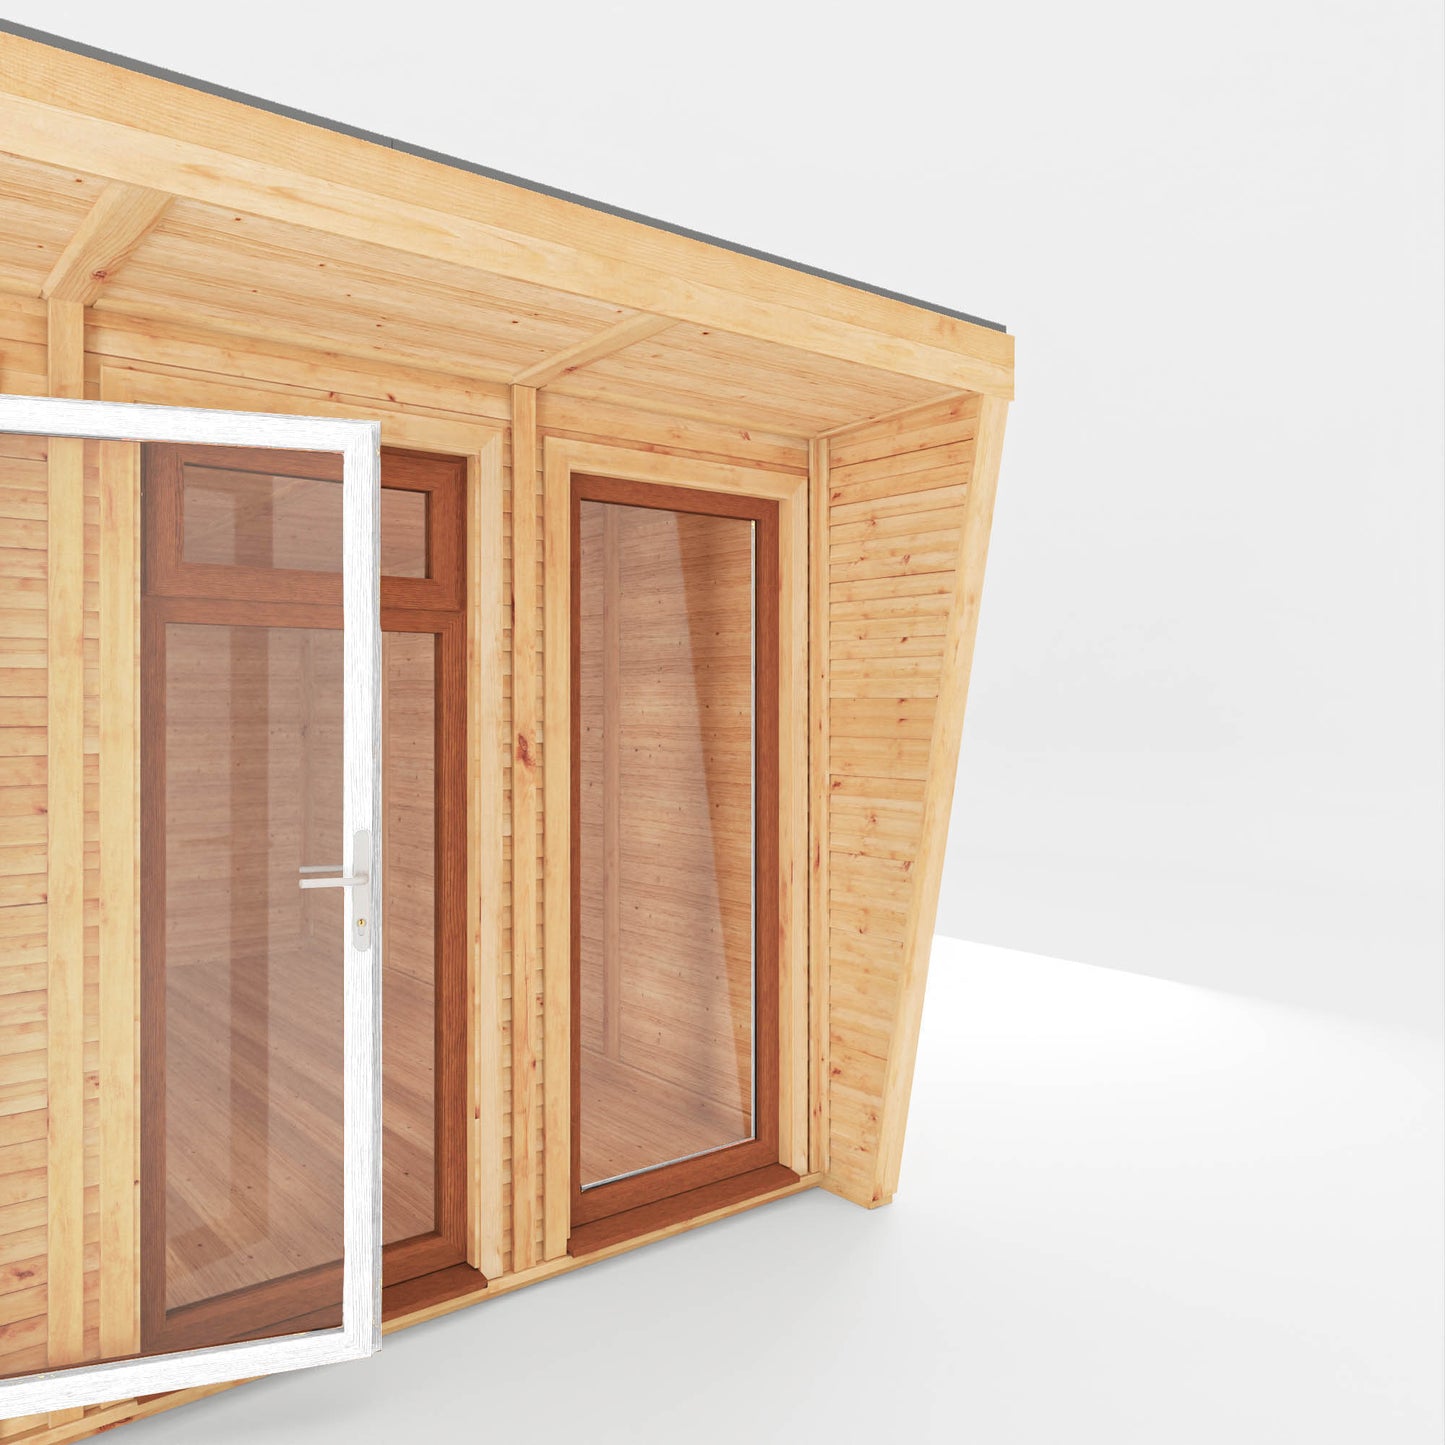 The Harlow 6m x 4m Premium Insulated Garden Room with Oak UPVC